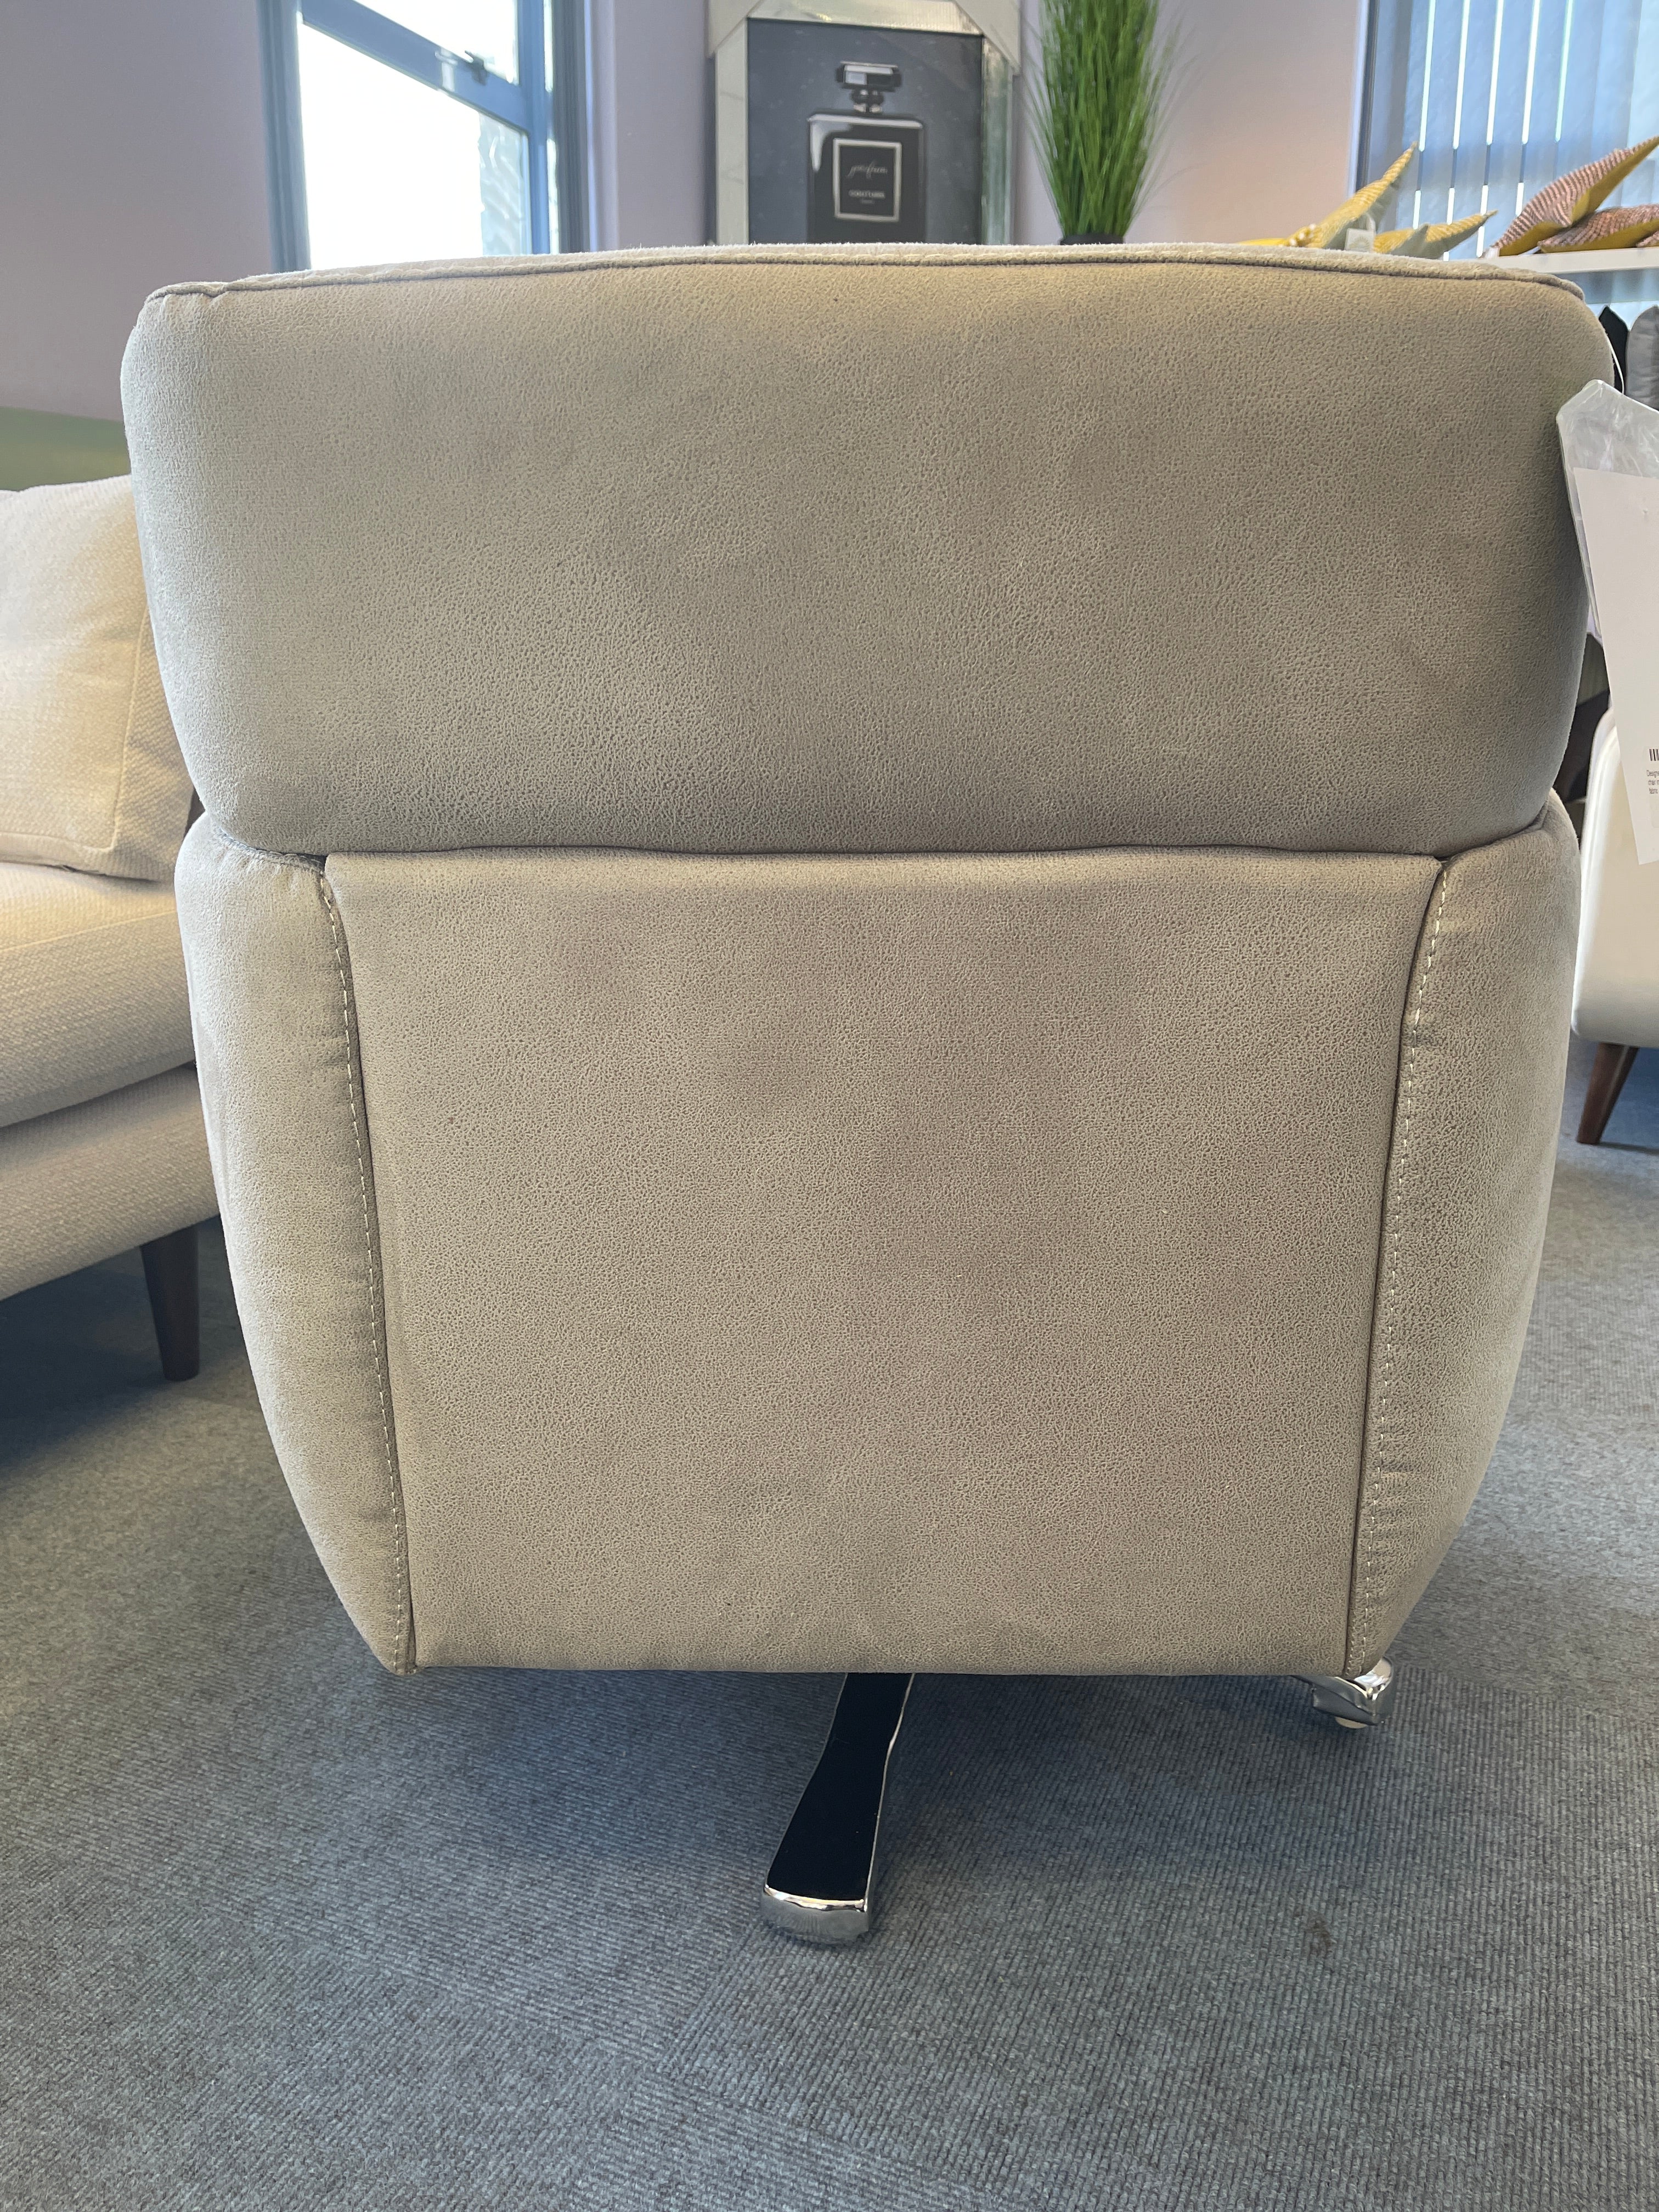 SOFOLOGY swivel base accent armchair in grey saddle fabric